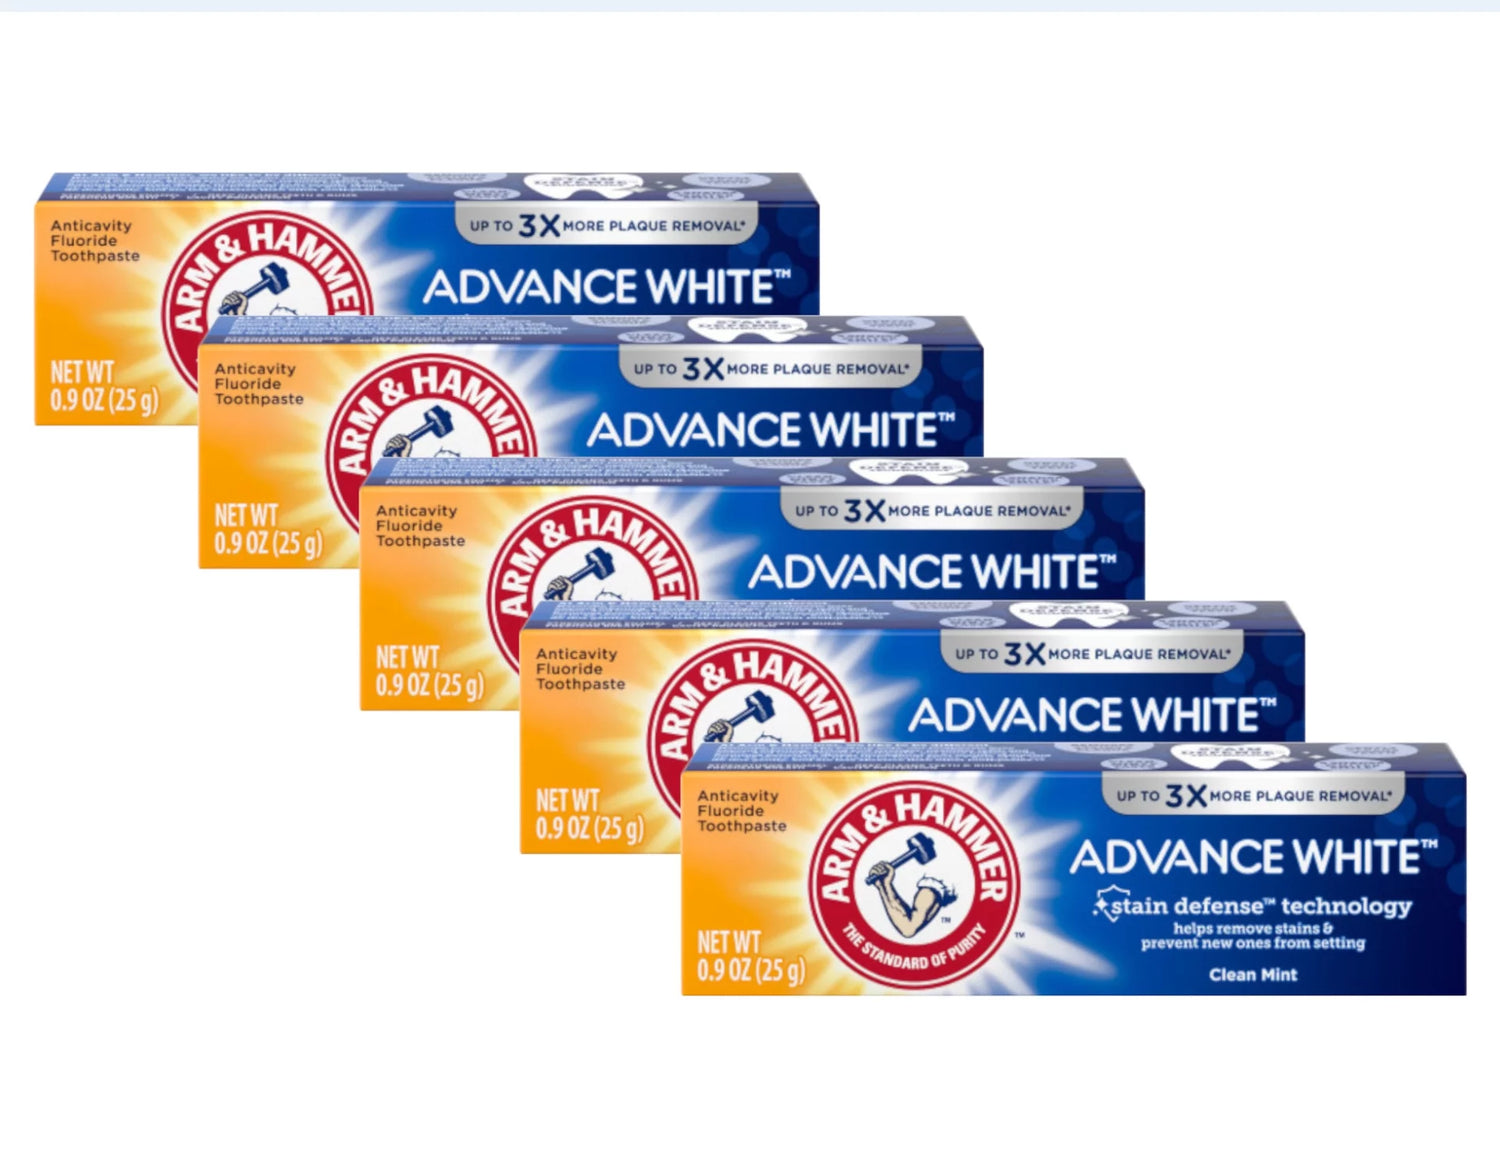 Advance White Toothpaste, Travel Size (0.9Oz) - Pack of 5